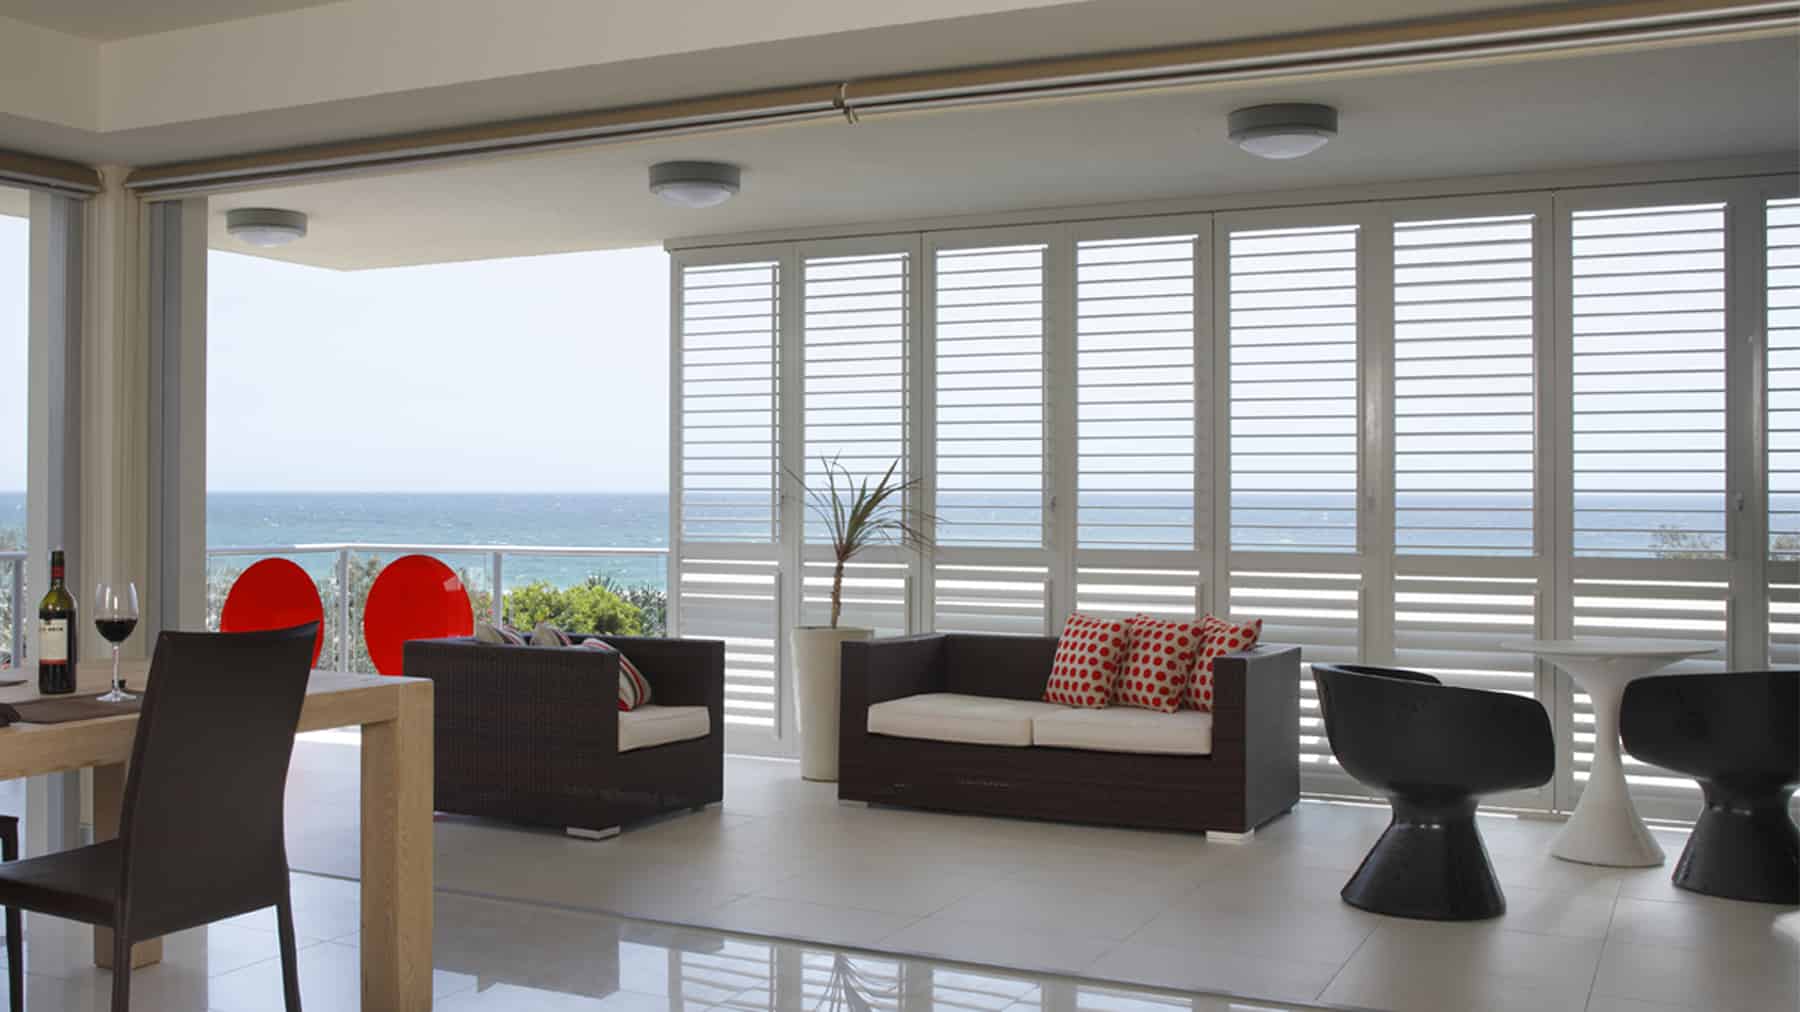 Bi-fold Shutters in Aluminium and Polymer for your home, apartment or office available by Superior Shade Sails Brisbane.